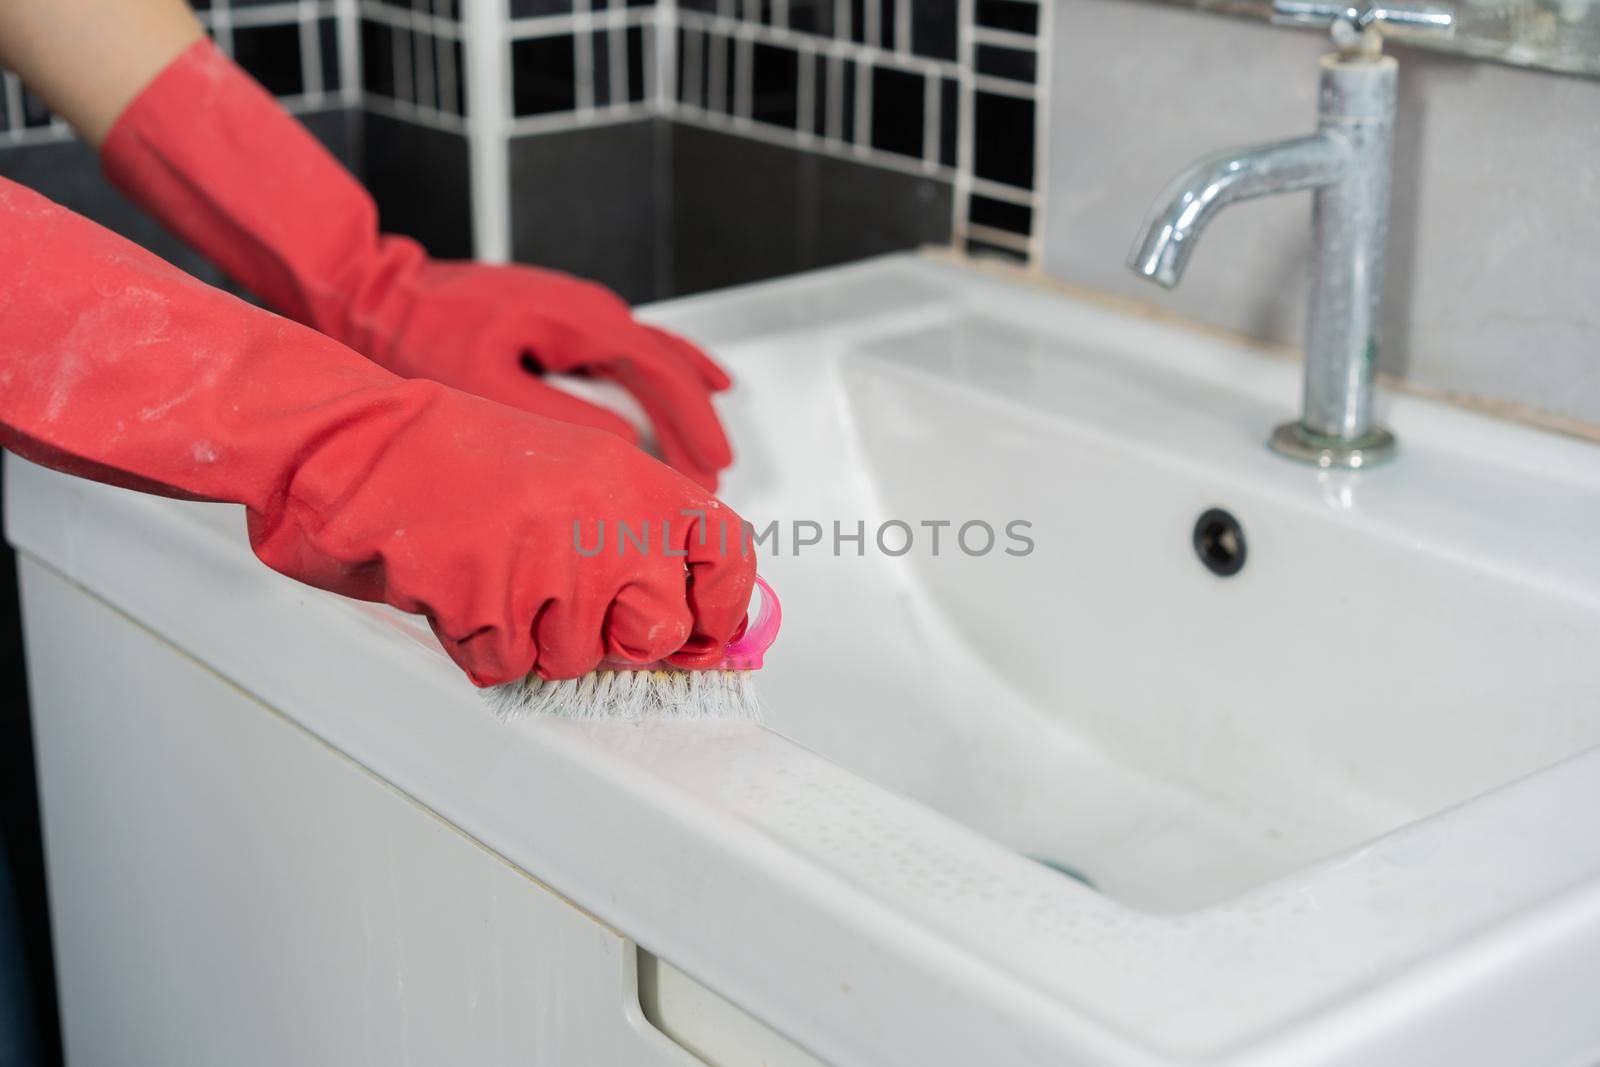 hand cleaning bathroom sink with a brush